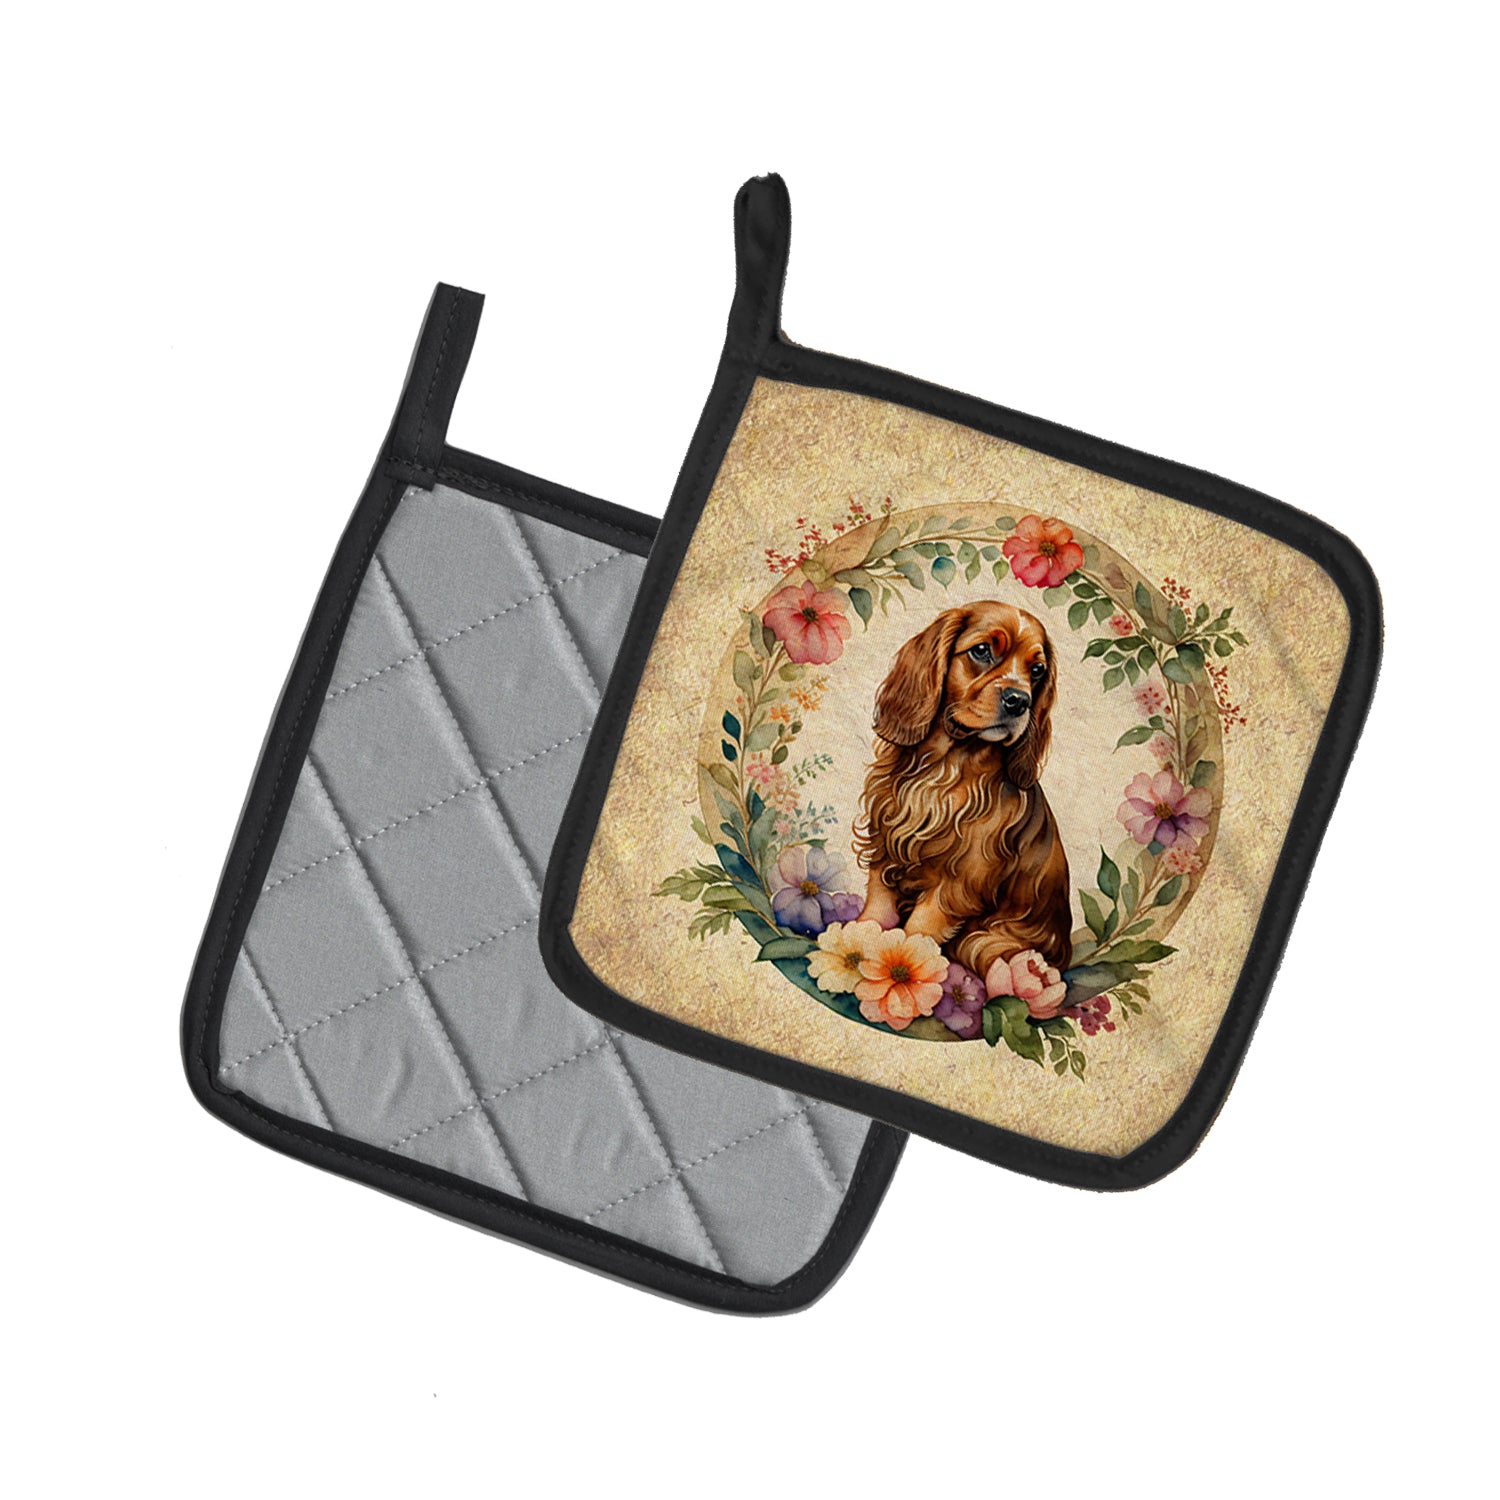 Buy this Sussex Spaniel and Flowers Pair of Pot Holders